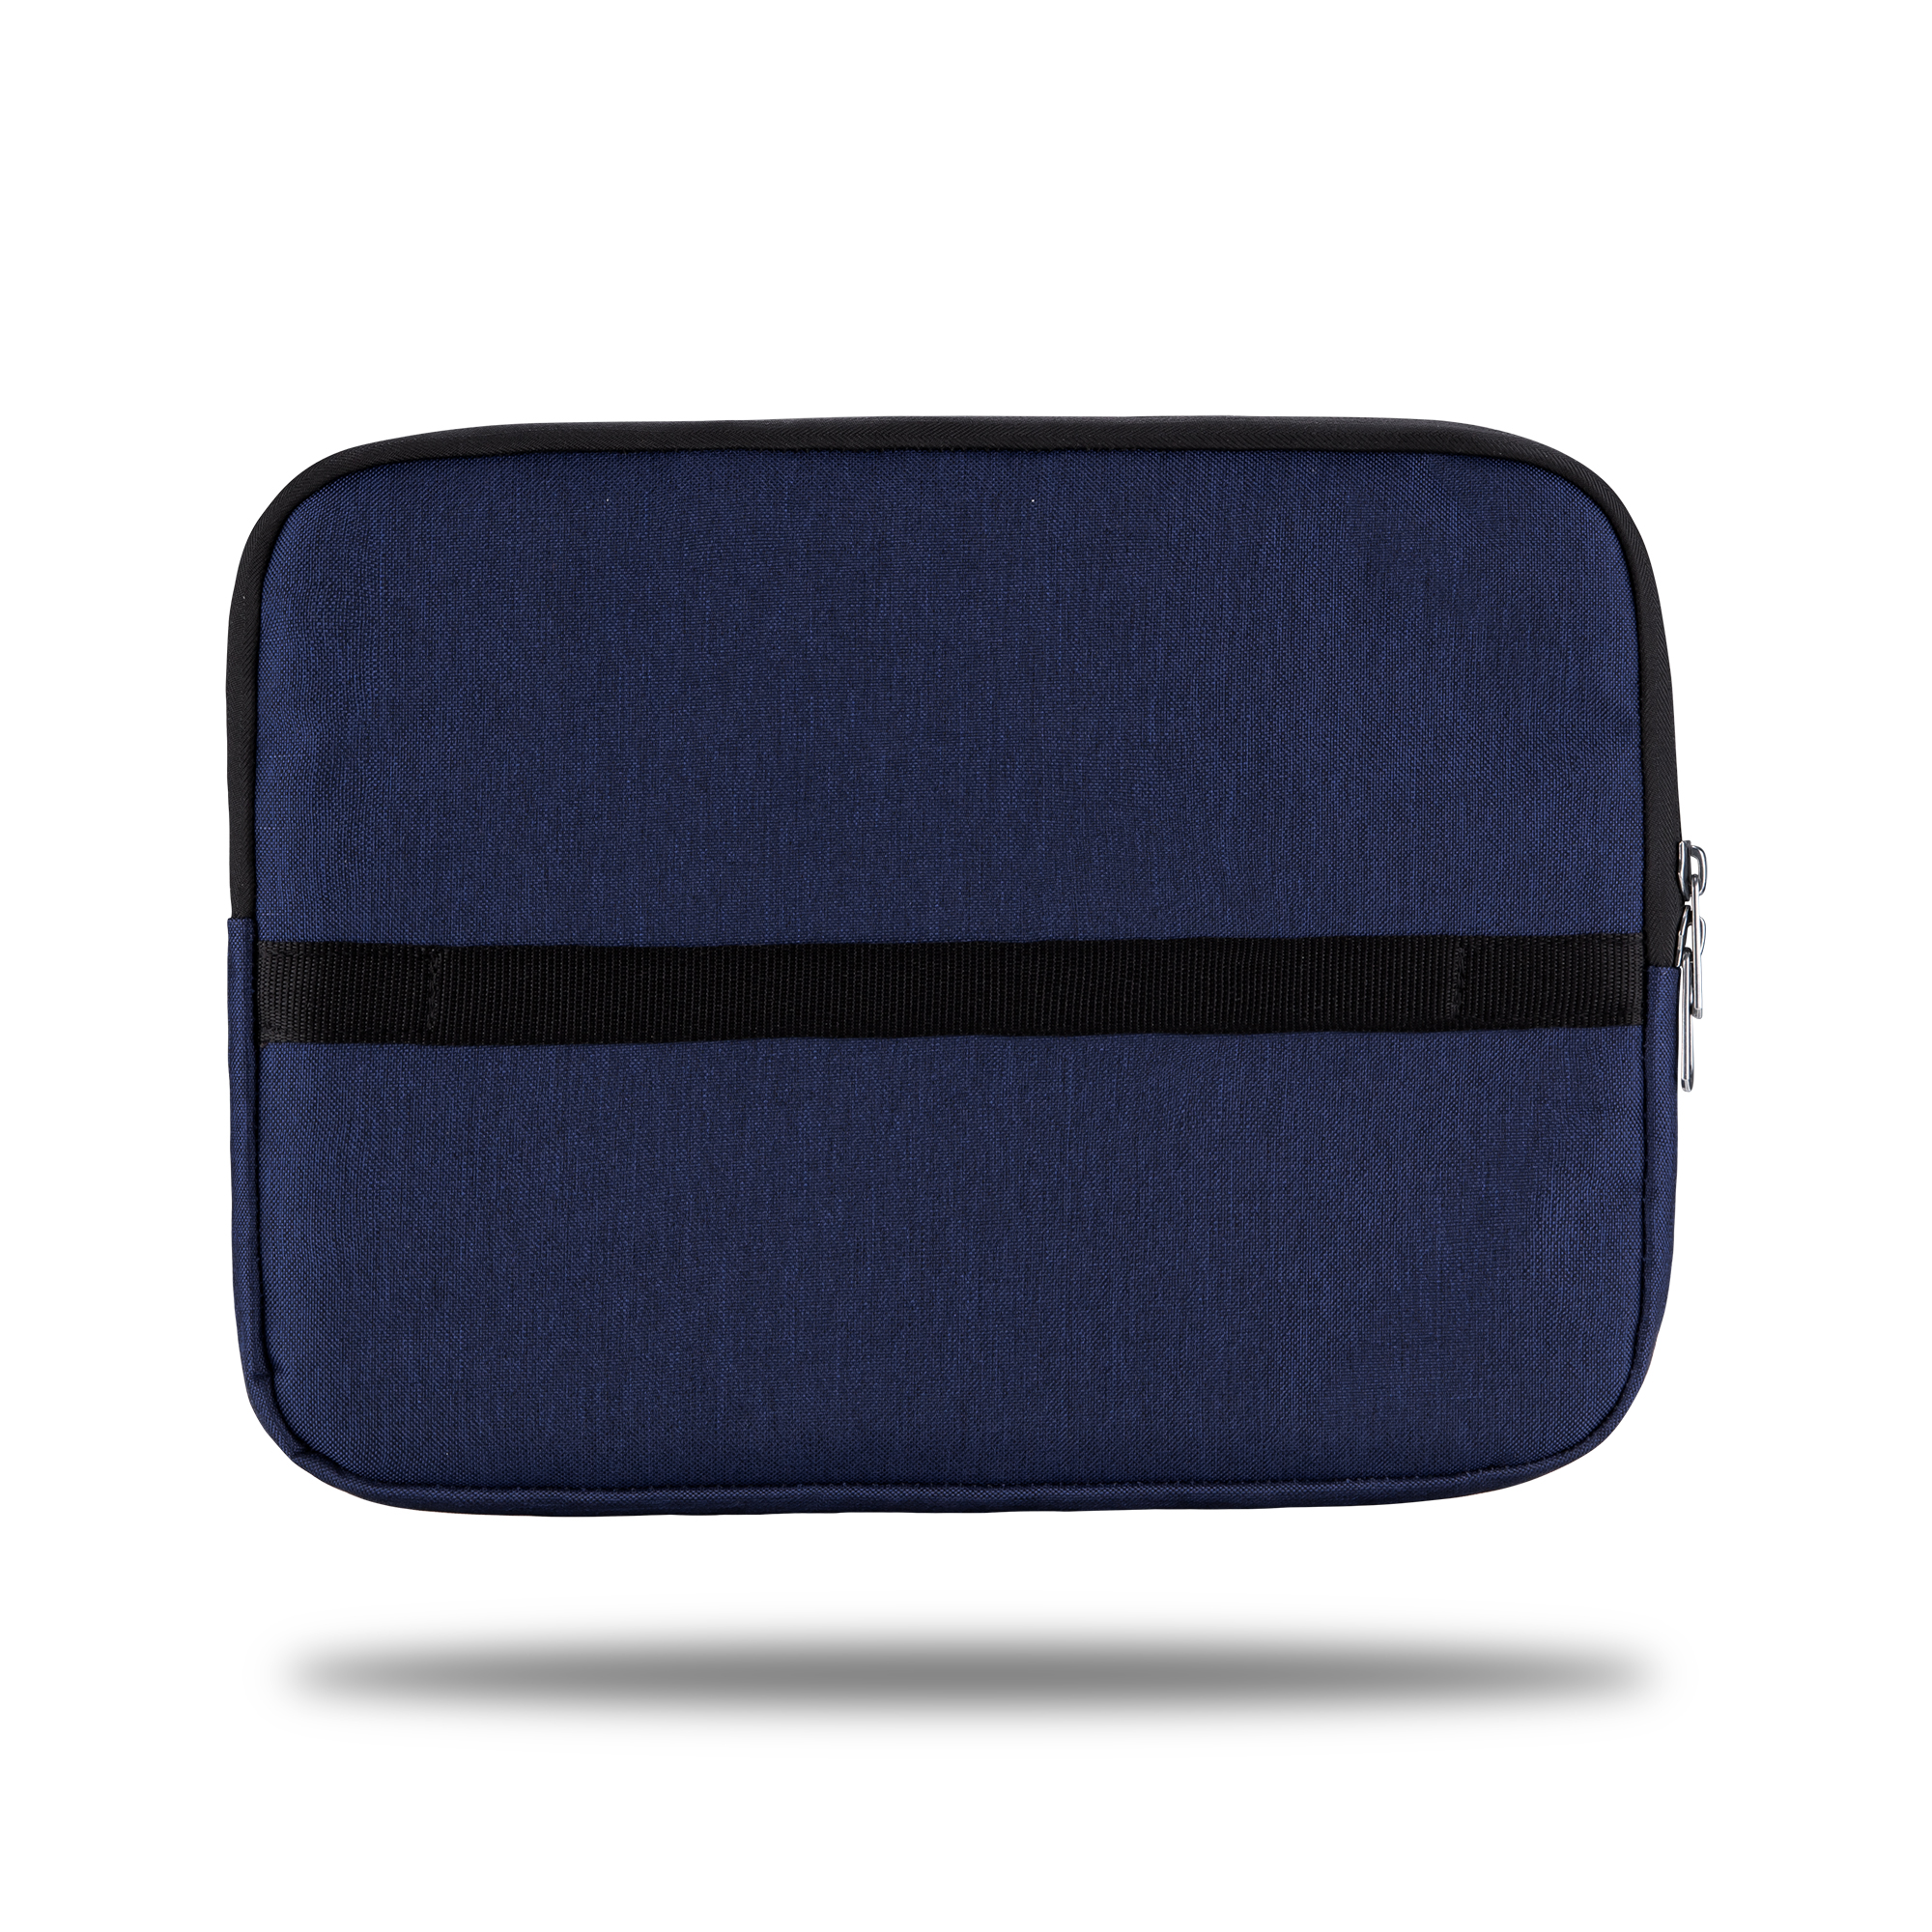 Classone Livorno Series WSL1401 13-14 inch Compatible WTXpro Waterproof Fabric Macbook ,Tablet Cover -Navy Blue